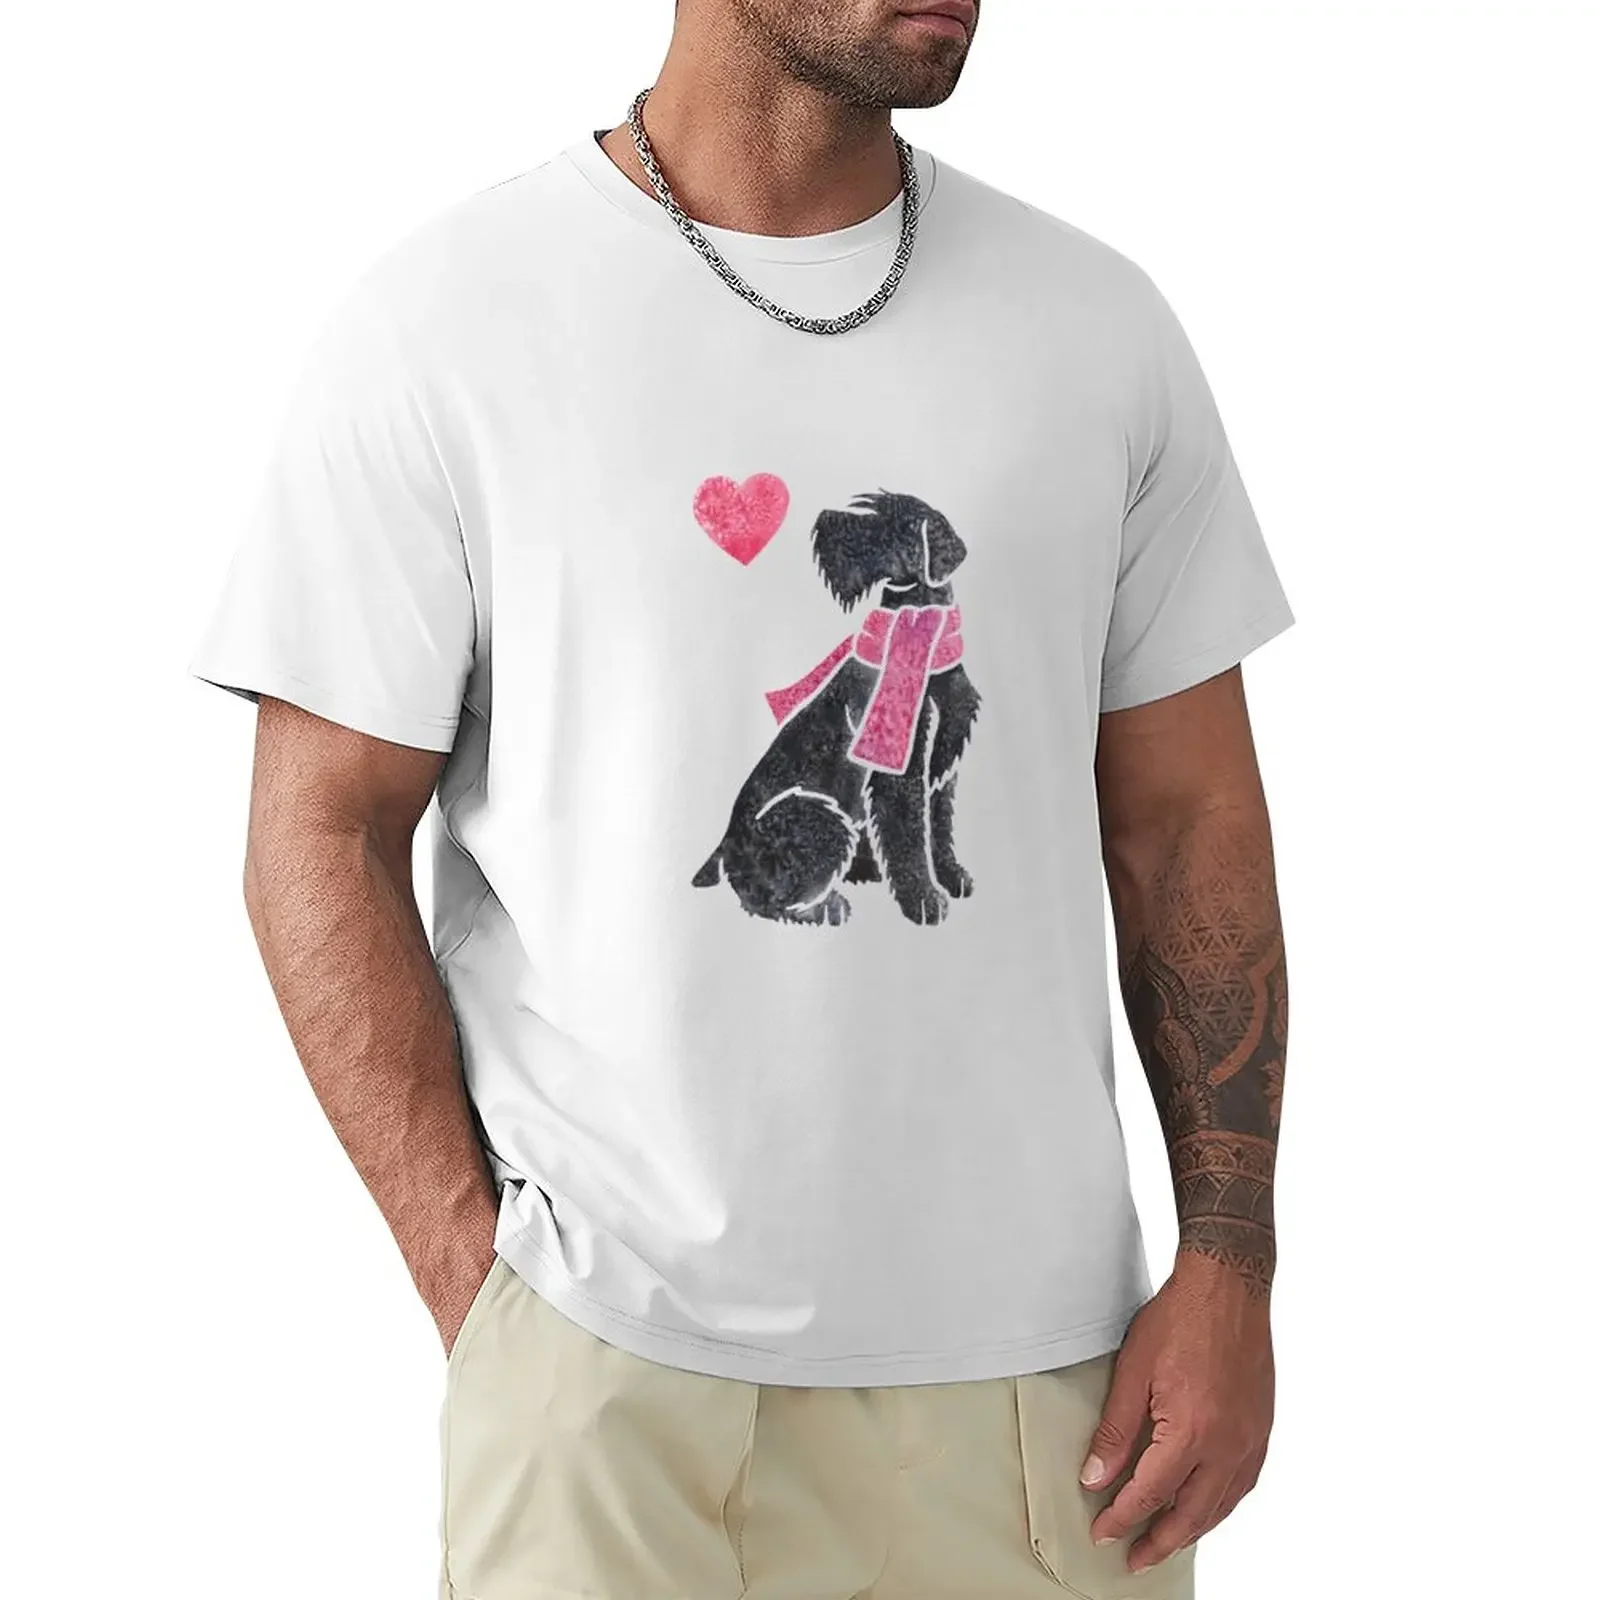 Watercolour Giant Schnauzer T-Shirt vintage anime mens white t shirts anime customs tops aesthetic clothes mens clothing funny meow wars t shirt women clothing cat lover gift vintage womens shirts 100% cotton unisex fashion ladies tops soft mens tee